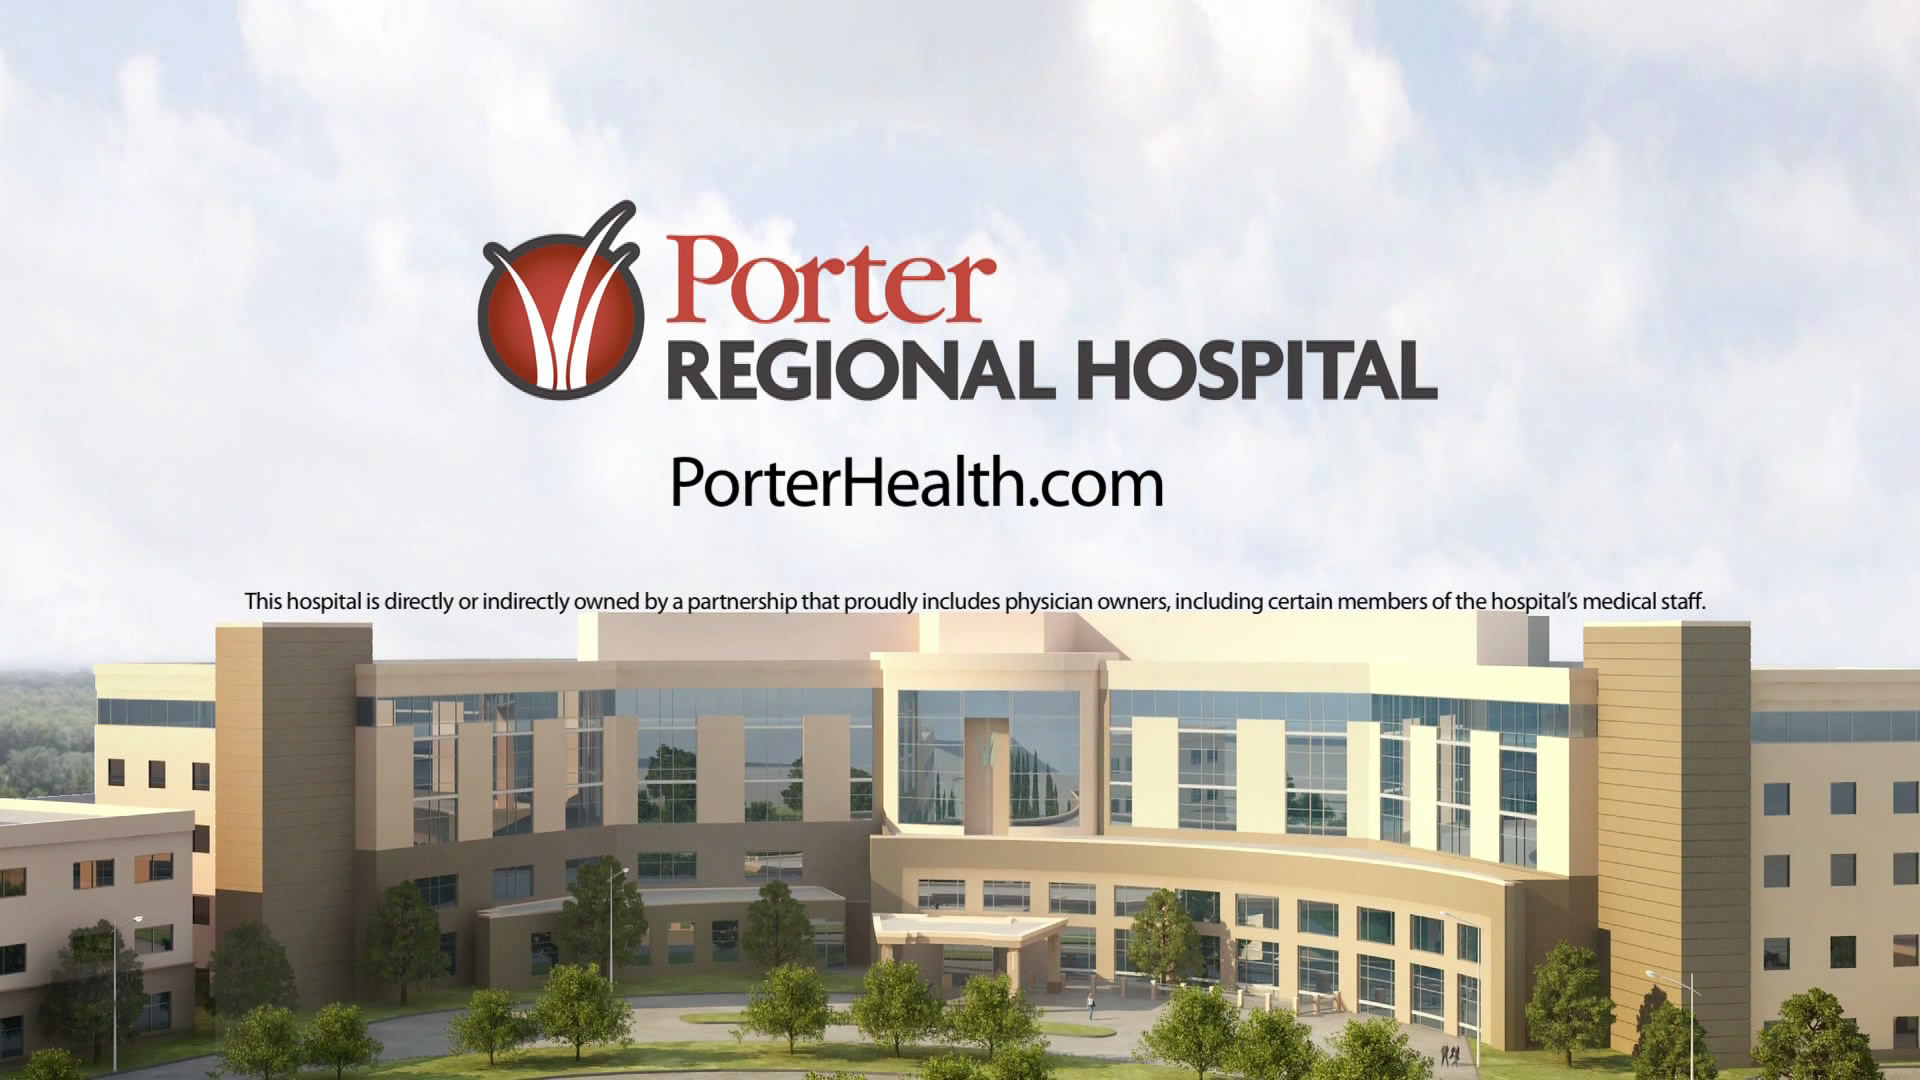 Porter Regional Hospital Only Hospital in Region to Receive National Recognition From American College of Surgeons